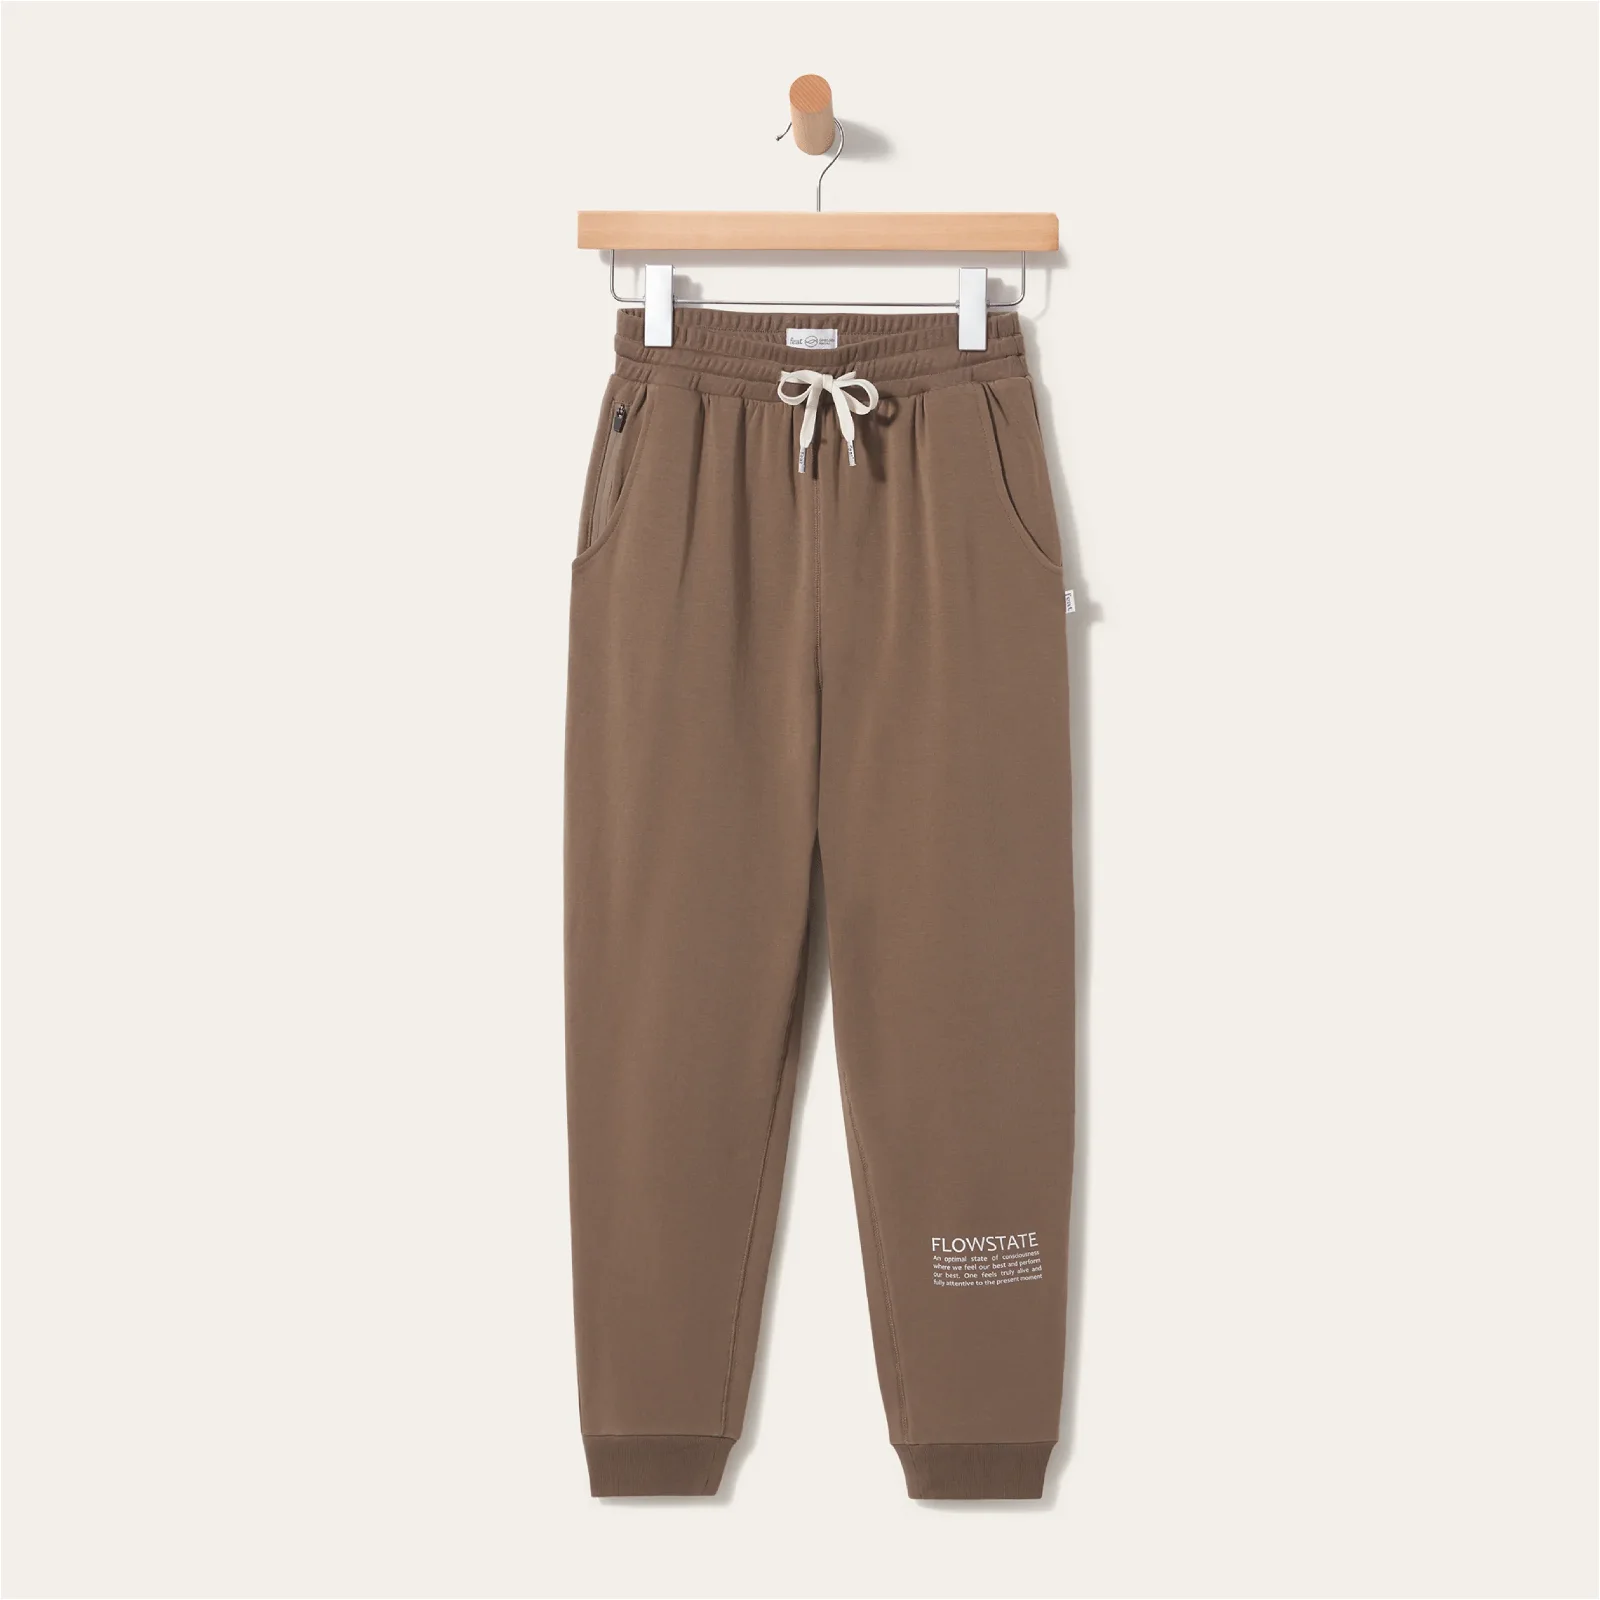 Image of Flowstate Joggers